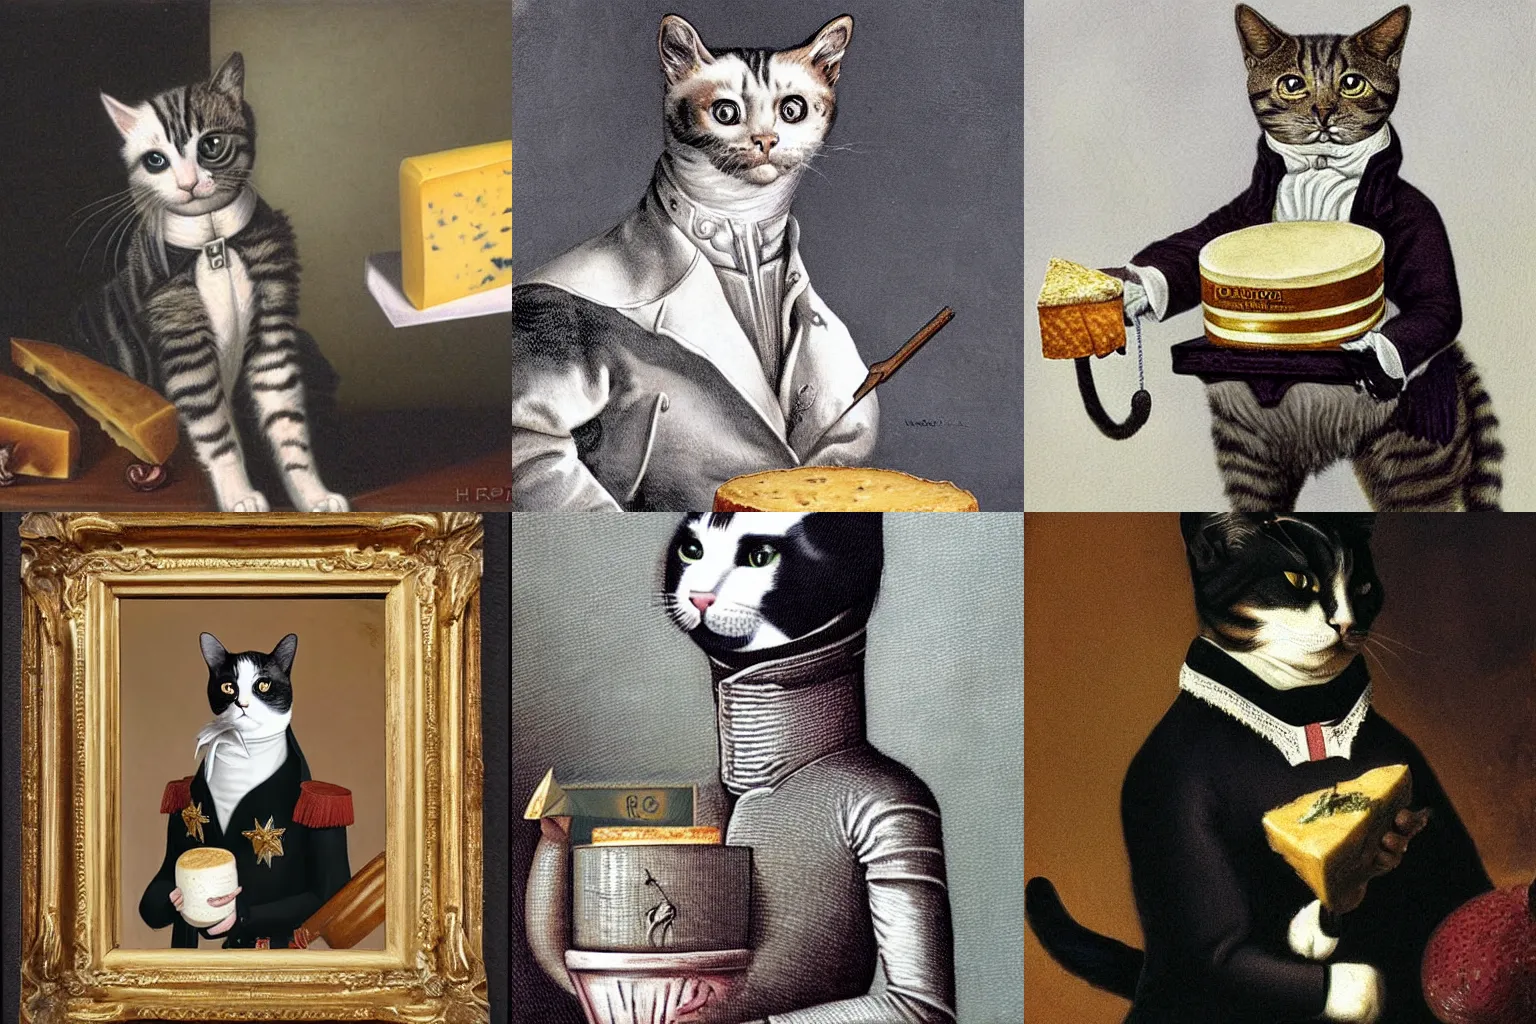 Prompt: a cat dressed as Napoleon holding cheese by H.R. Giger